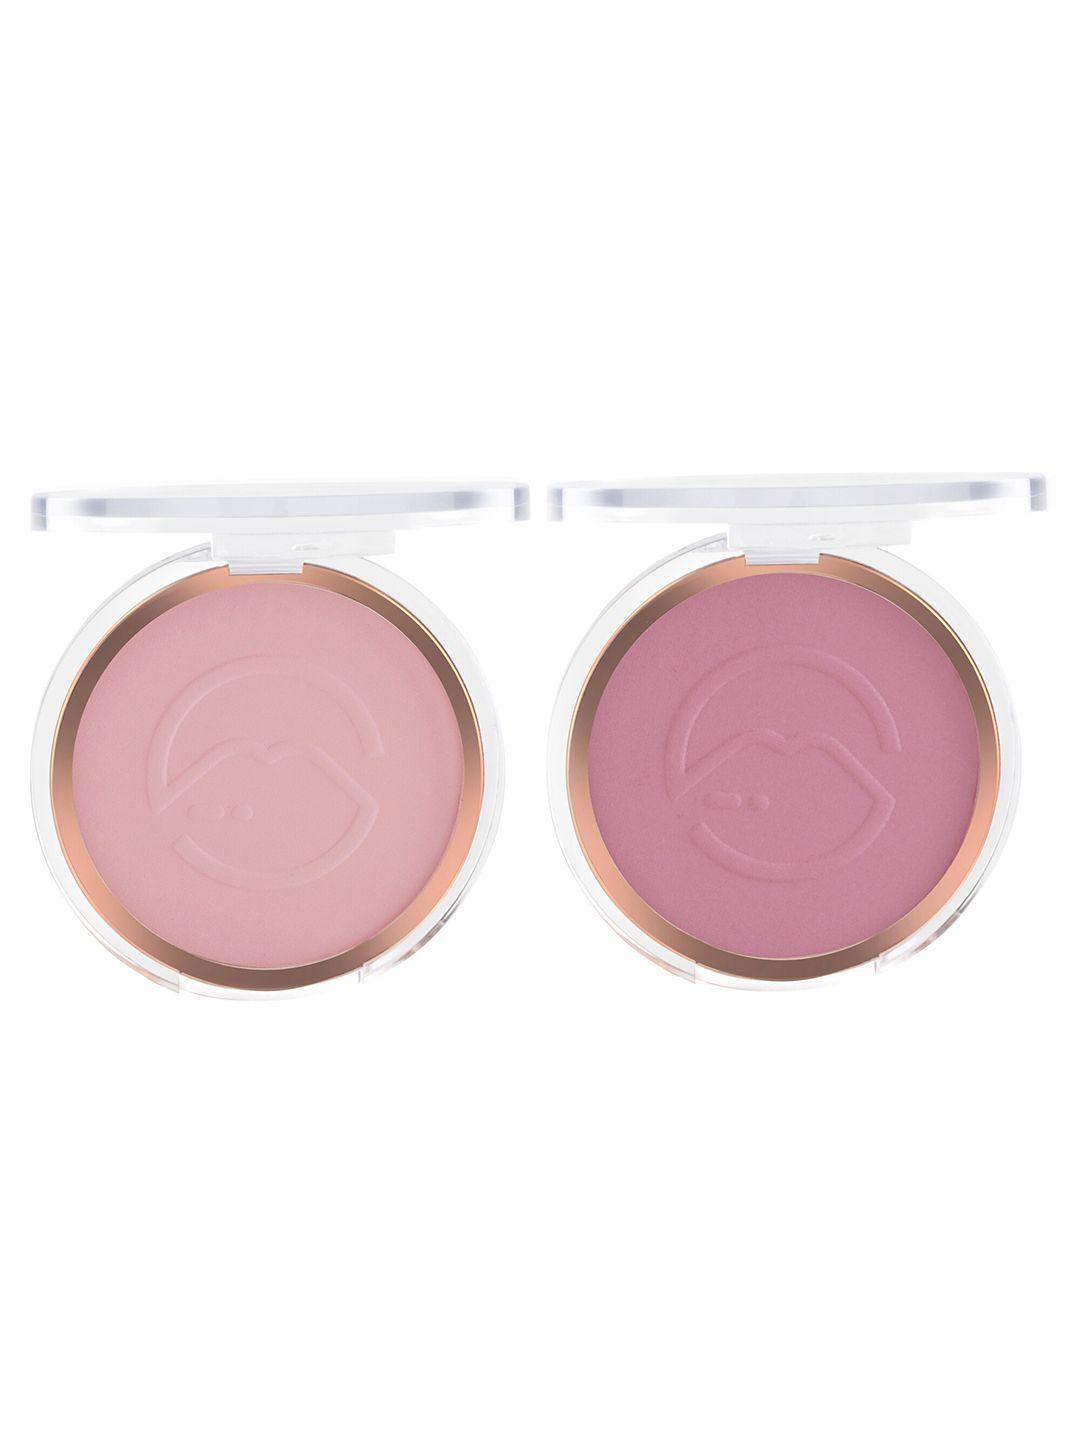 mars-set-of-2-flush-of-love-highly-pigmented-matte-face-blusher---shade-06-&-05